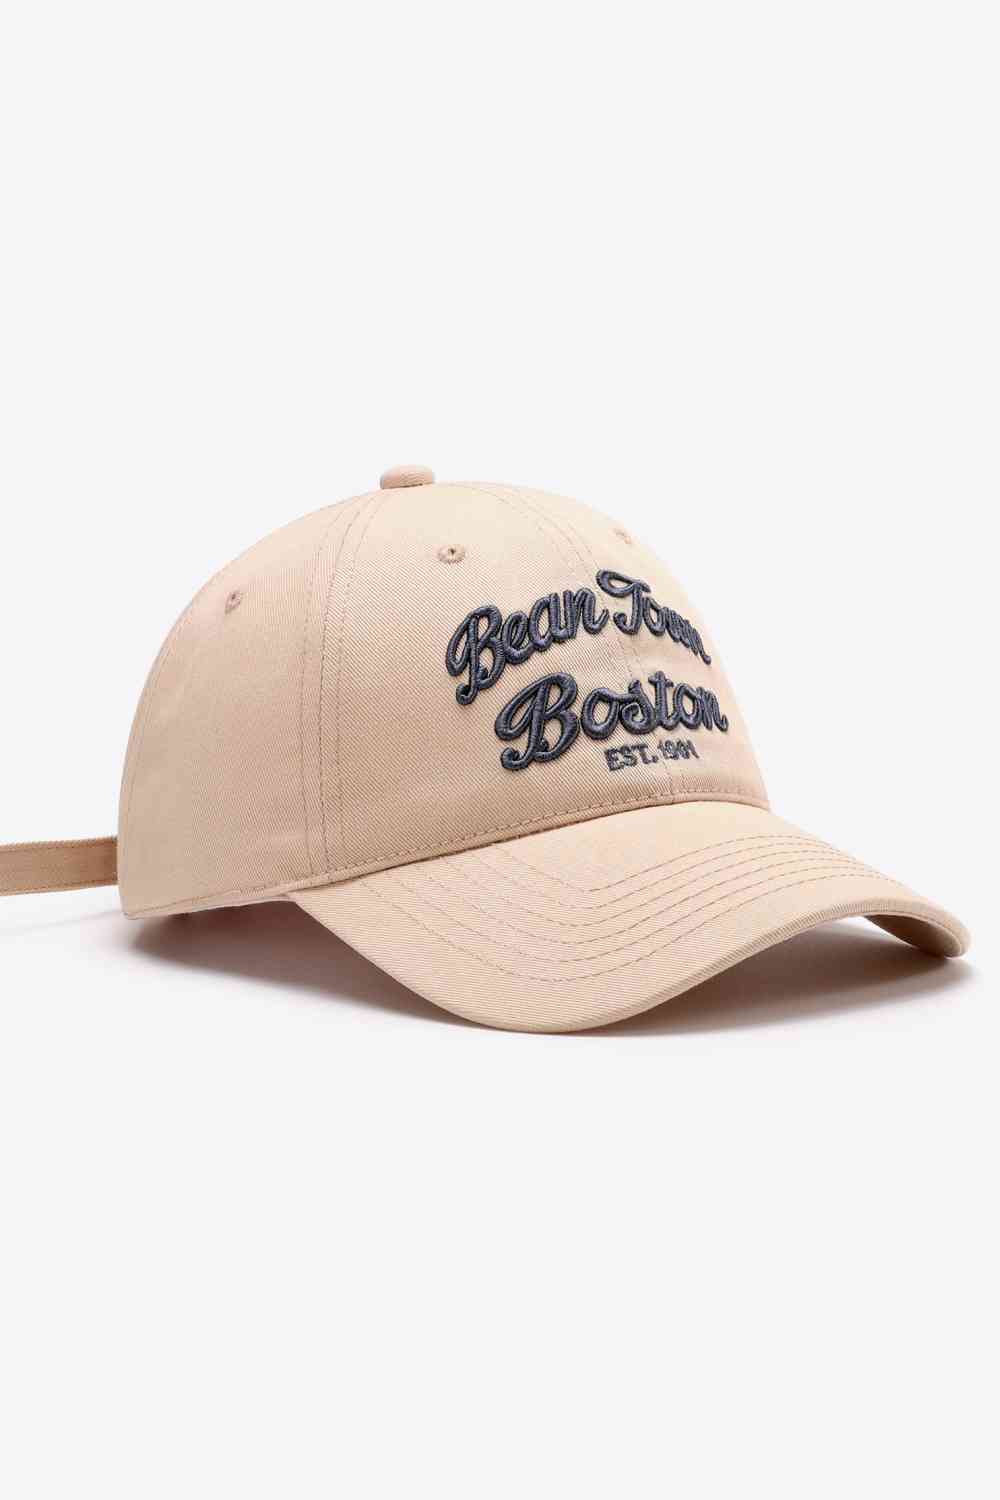 Embroidered Graphic Adjustable Baseball Cap Sand One Size